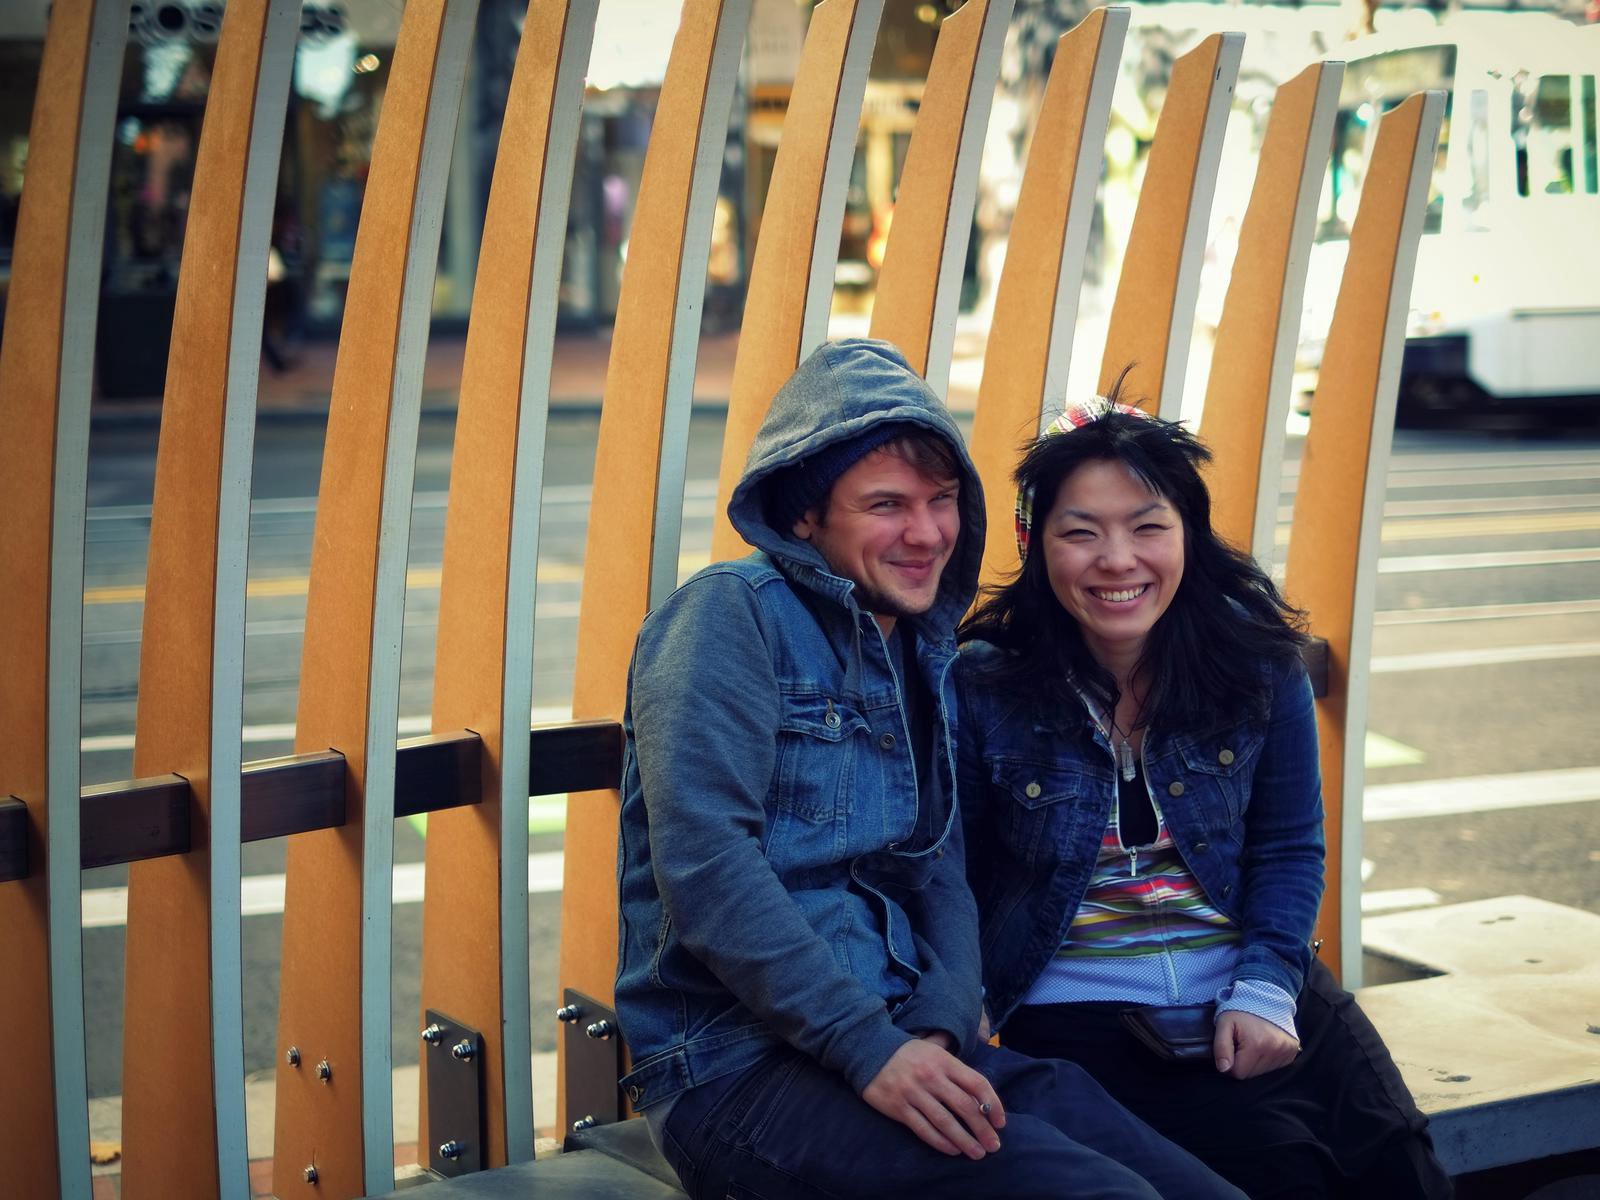 Two people sit on a bench in front of a wooden fence.